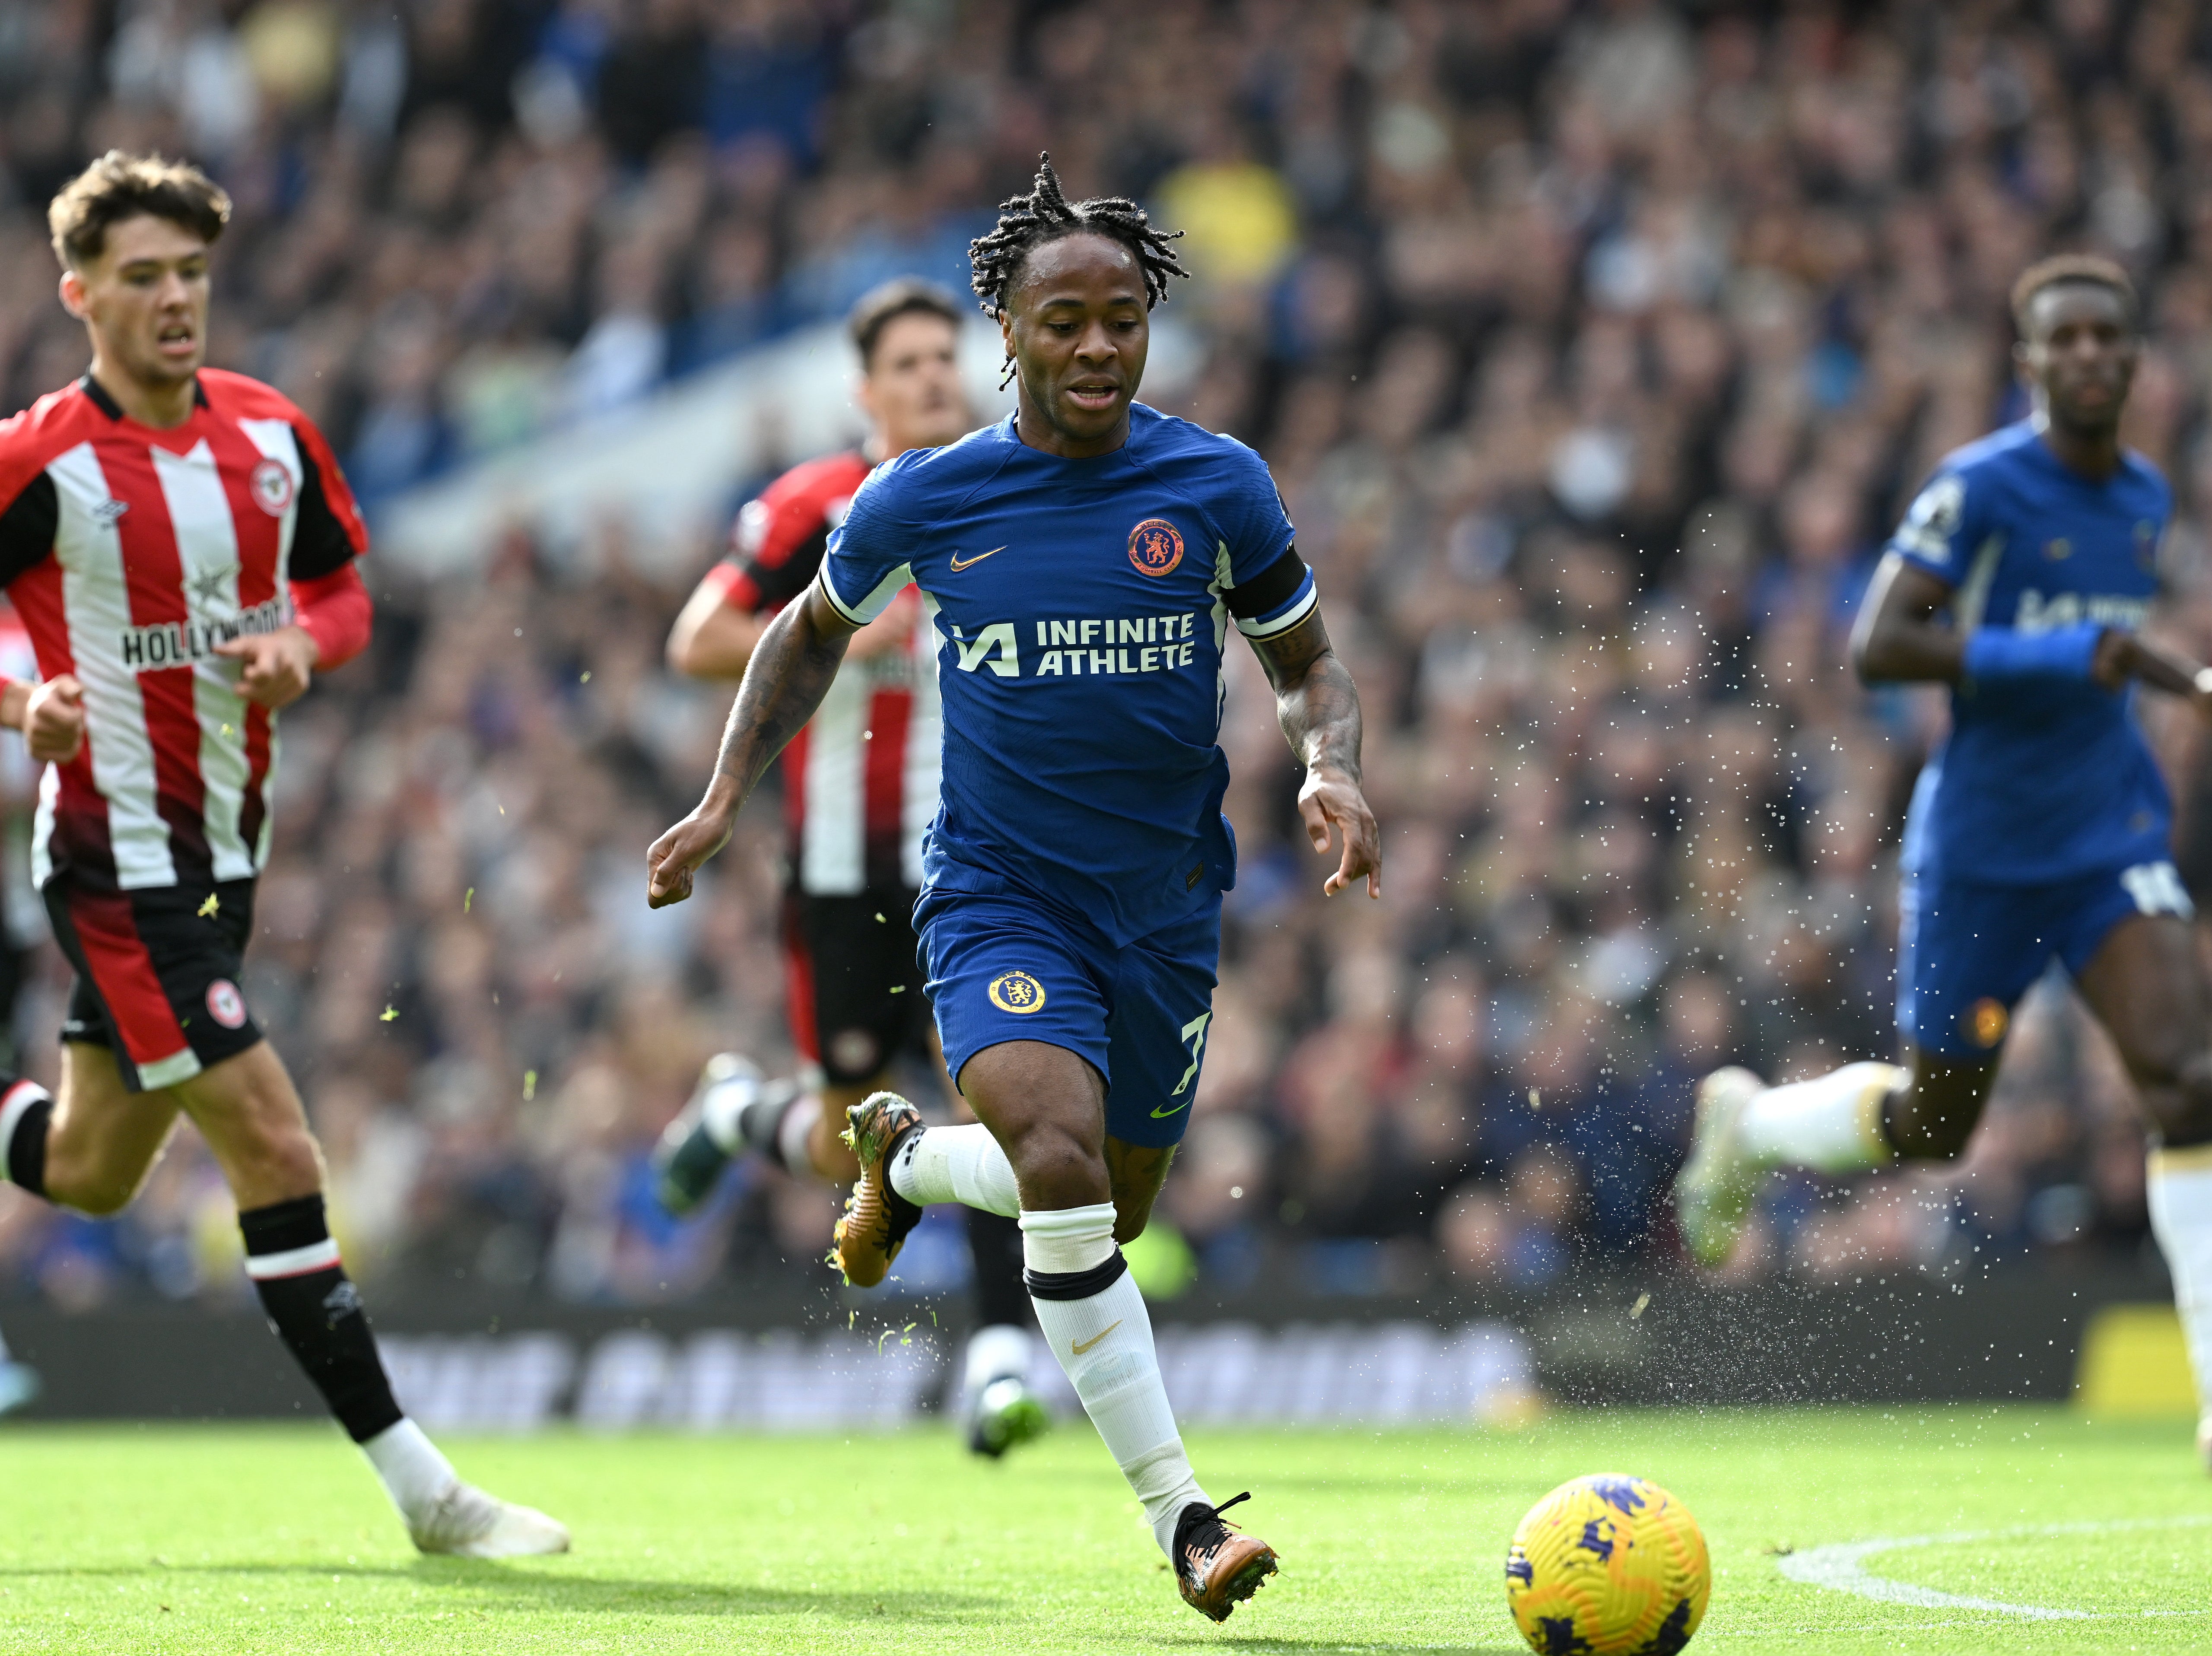 Raheem Sterling on the ball for Chelsea in the first half